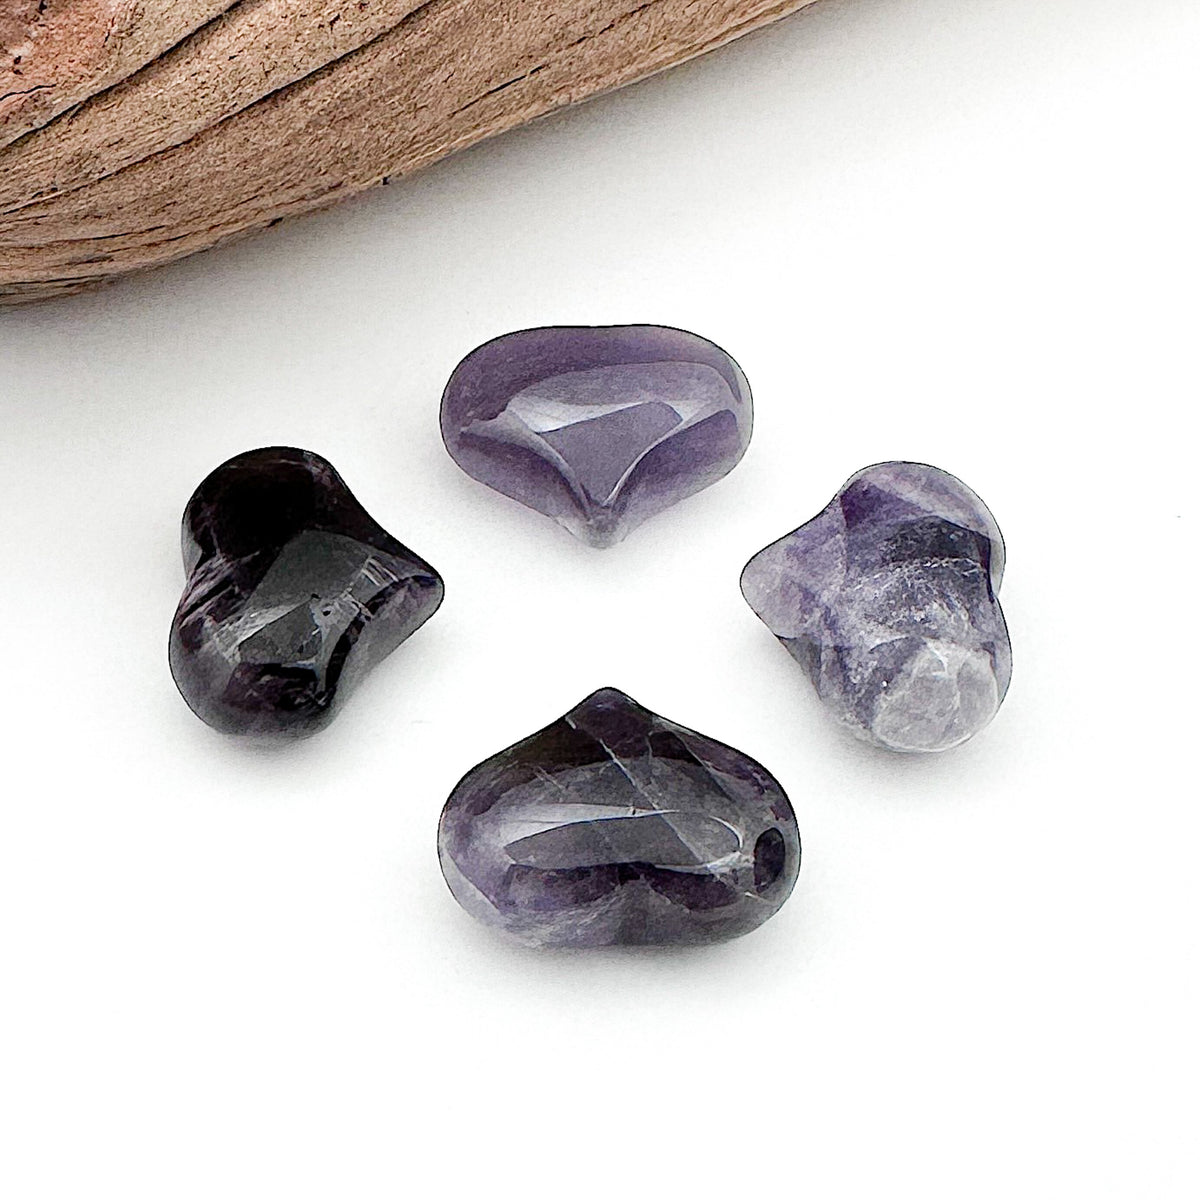 Four amethyst hearts laid out so the ends all point towards the center of the group